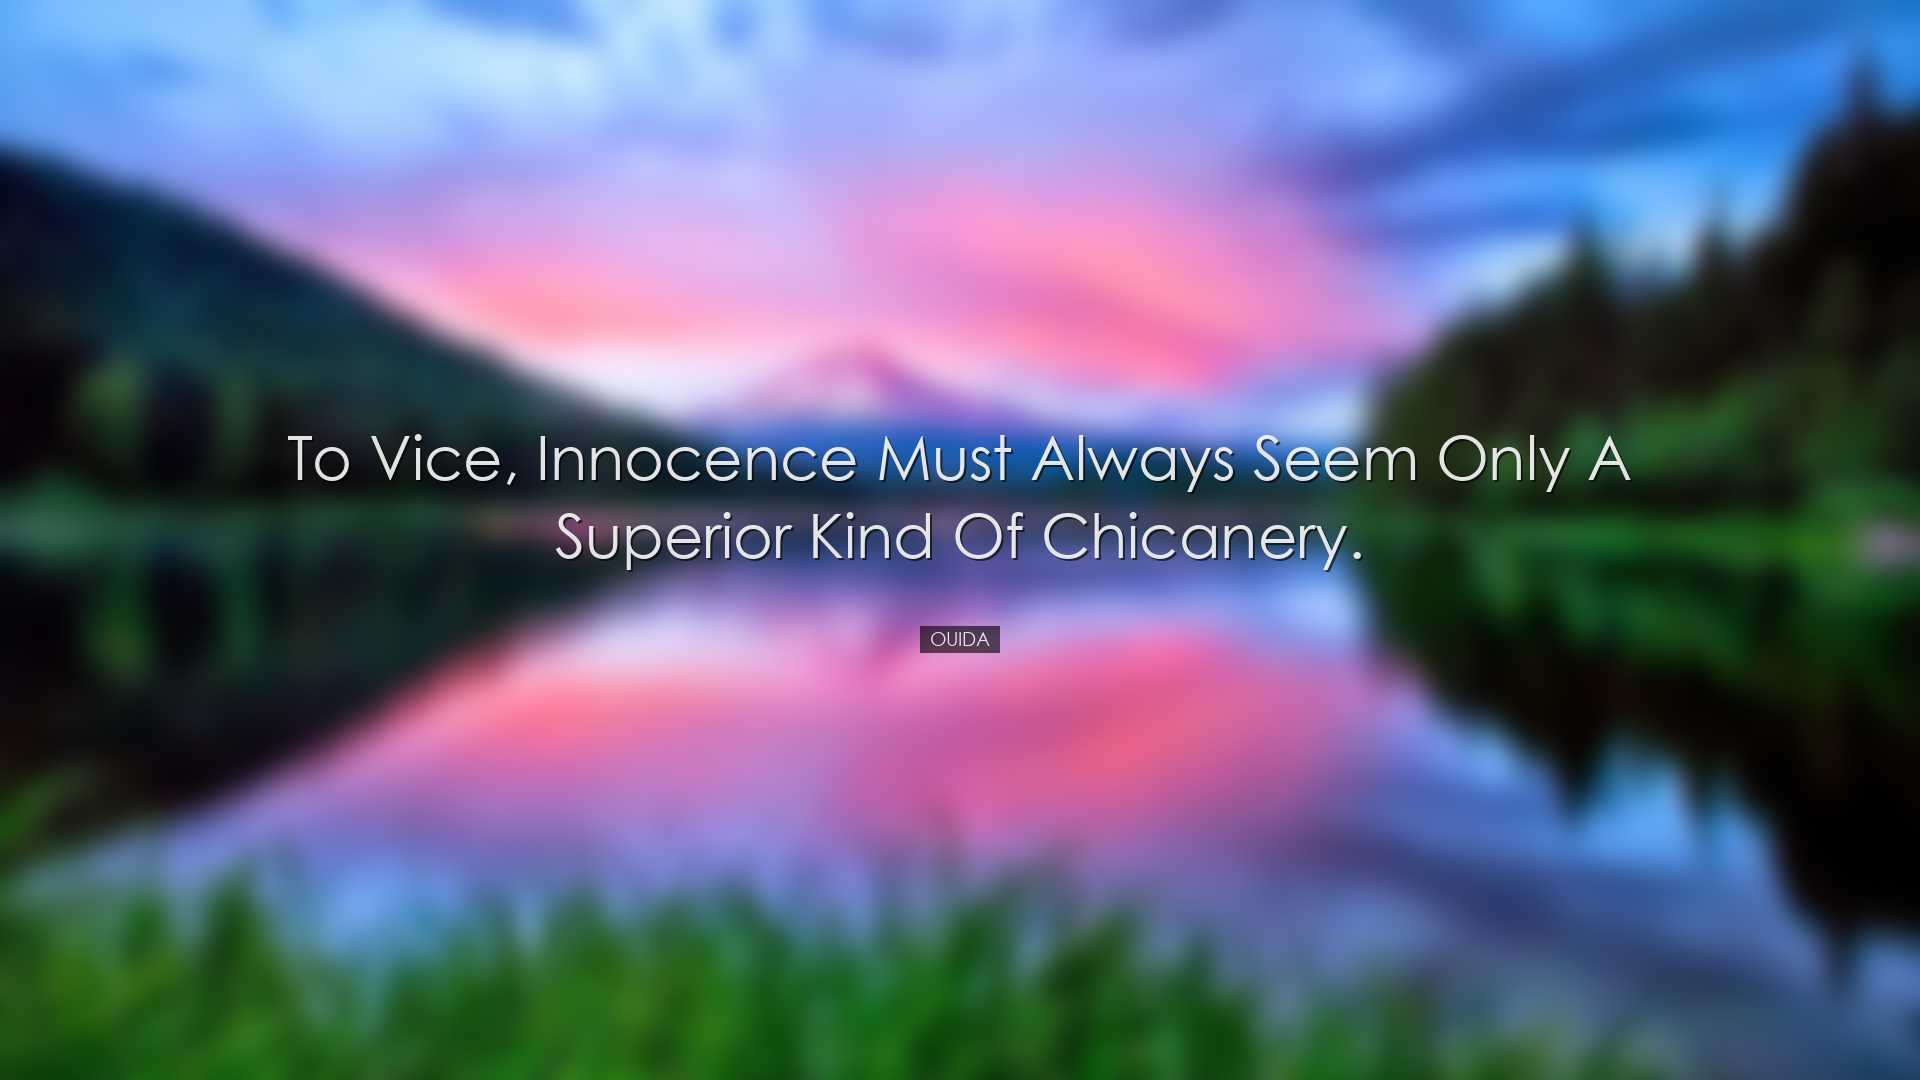 To vice, innocence must always seem only a superior kind of chican